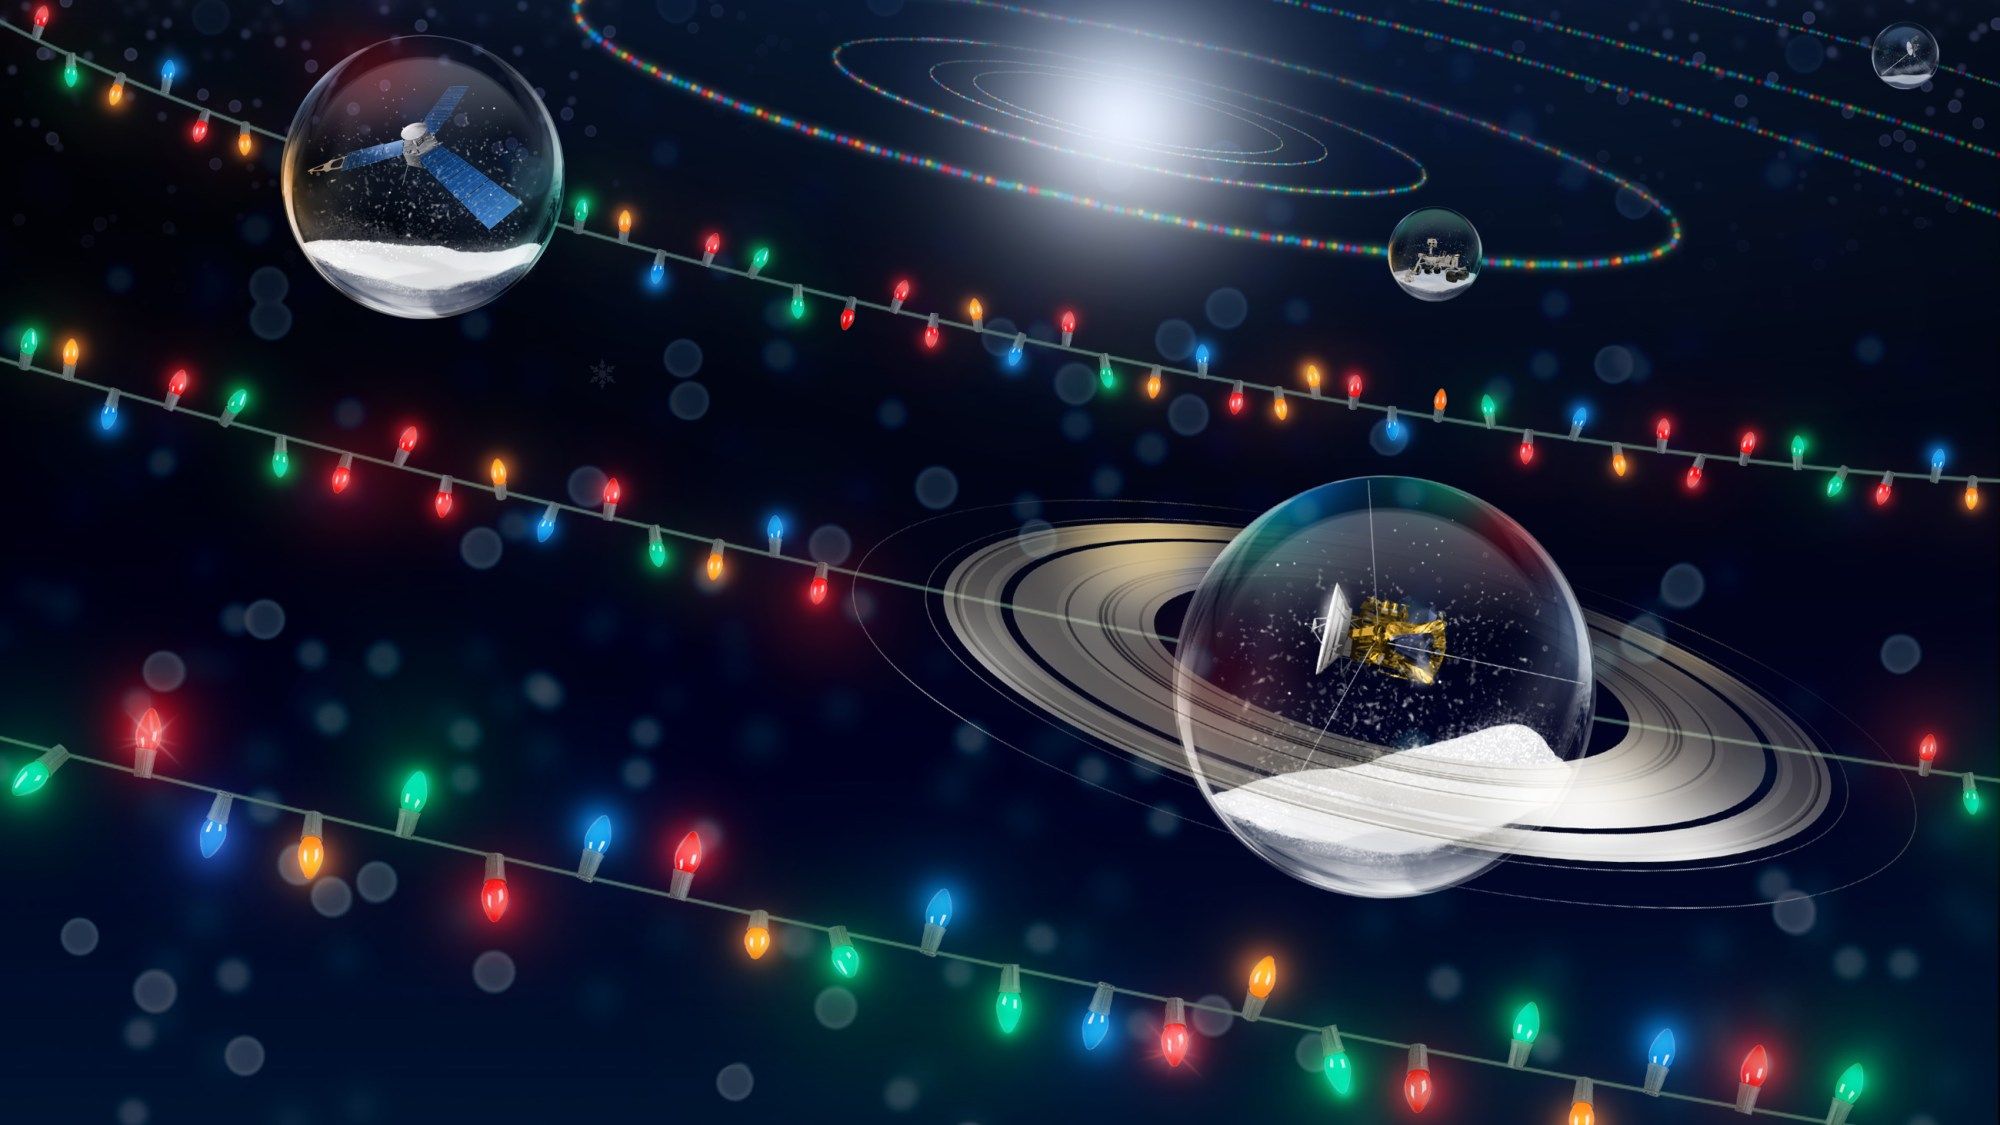 Illustration of holiday lights and spacecraft in snowglobes.